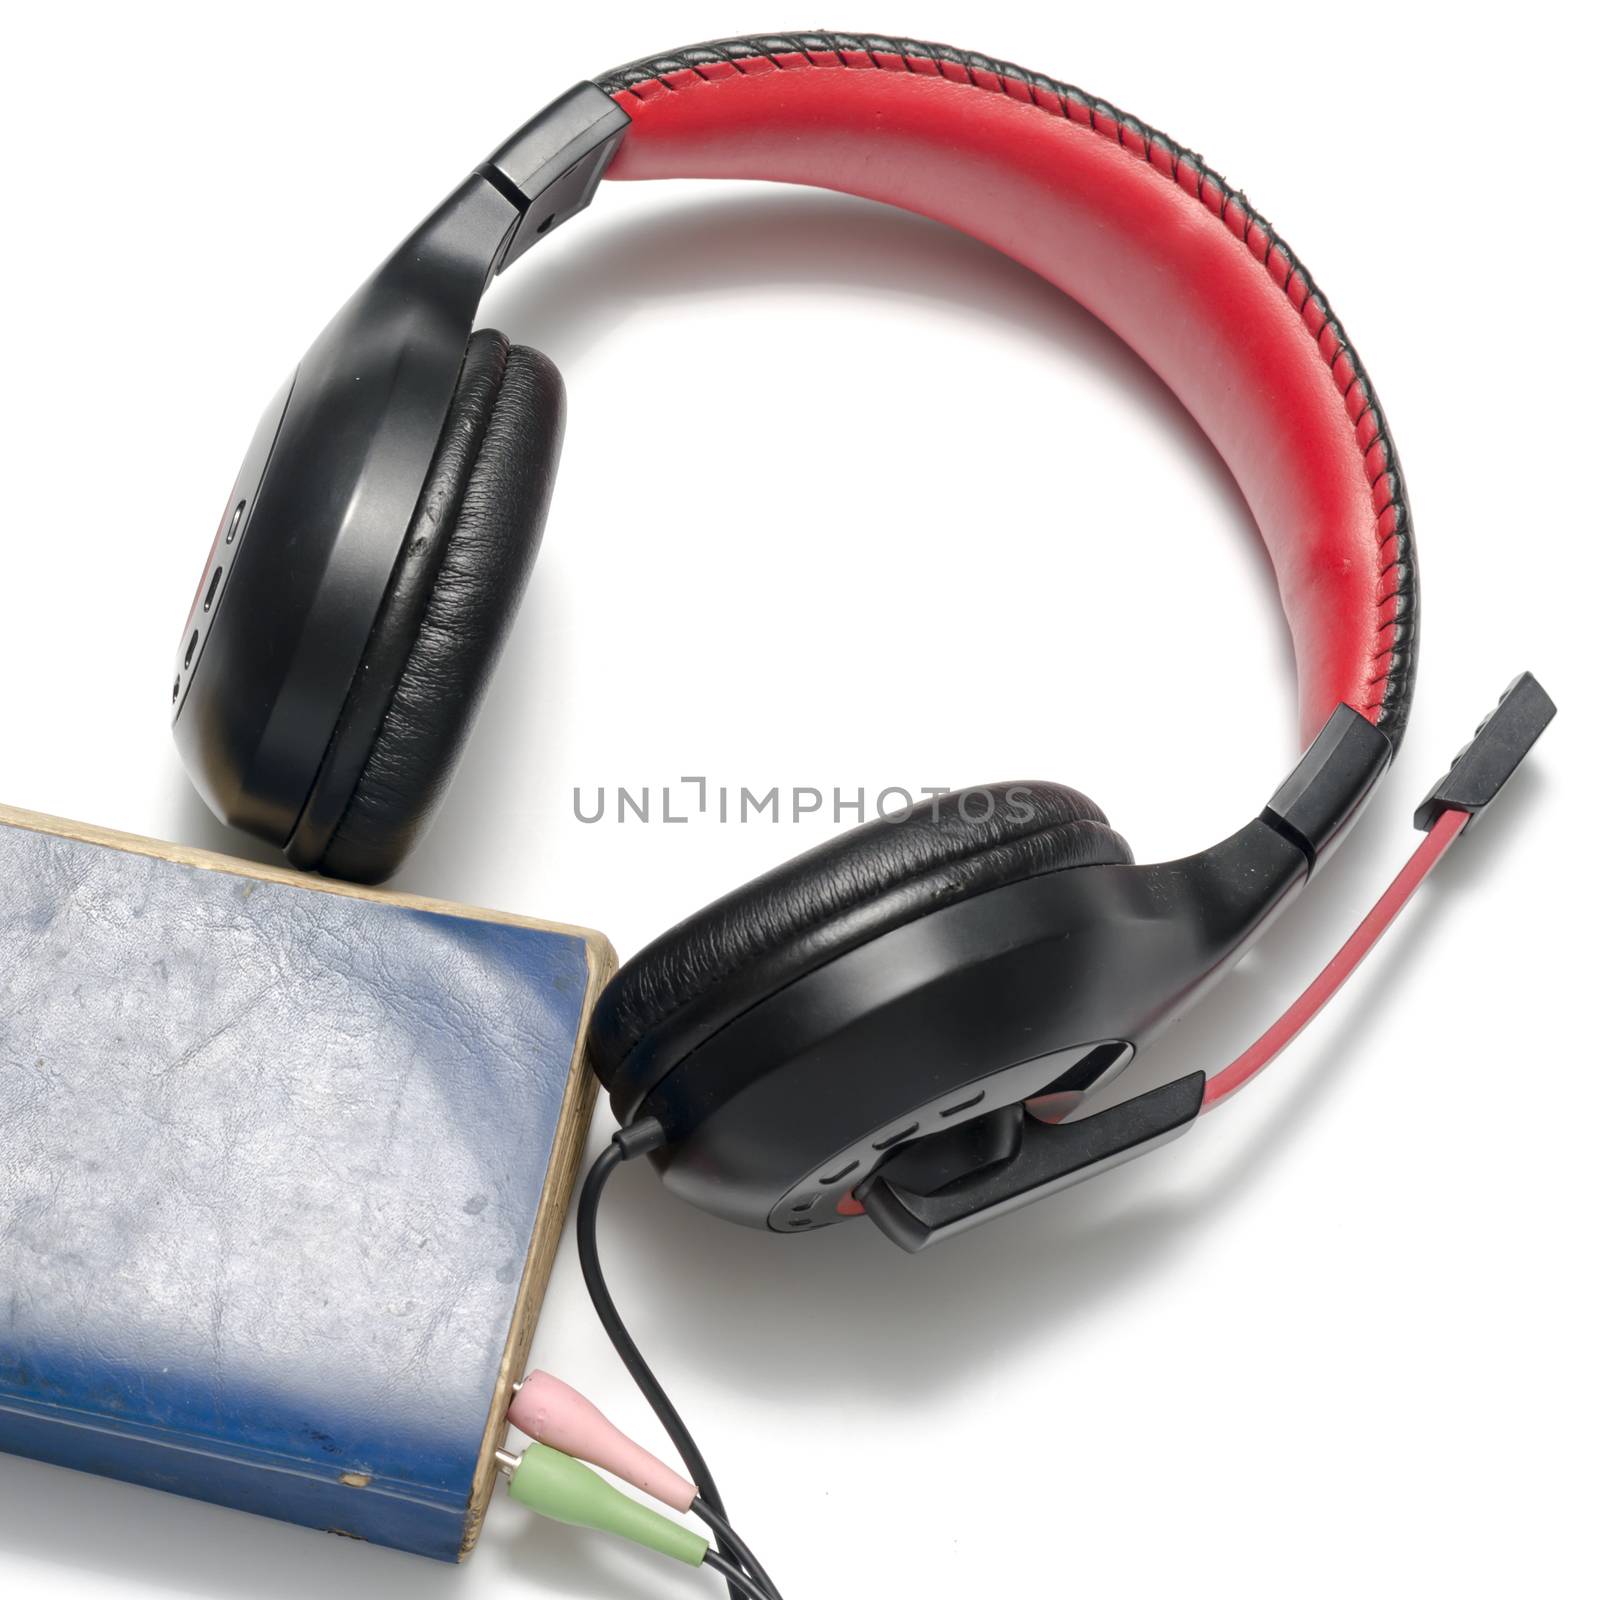 head phone with book concept audio book on a white background